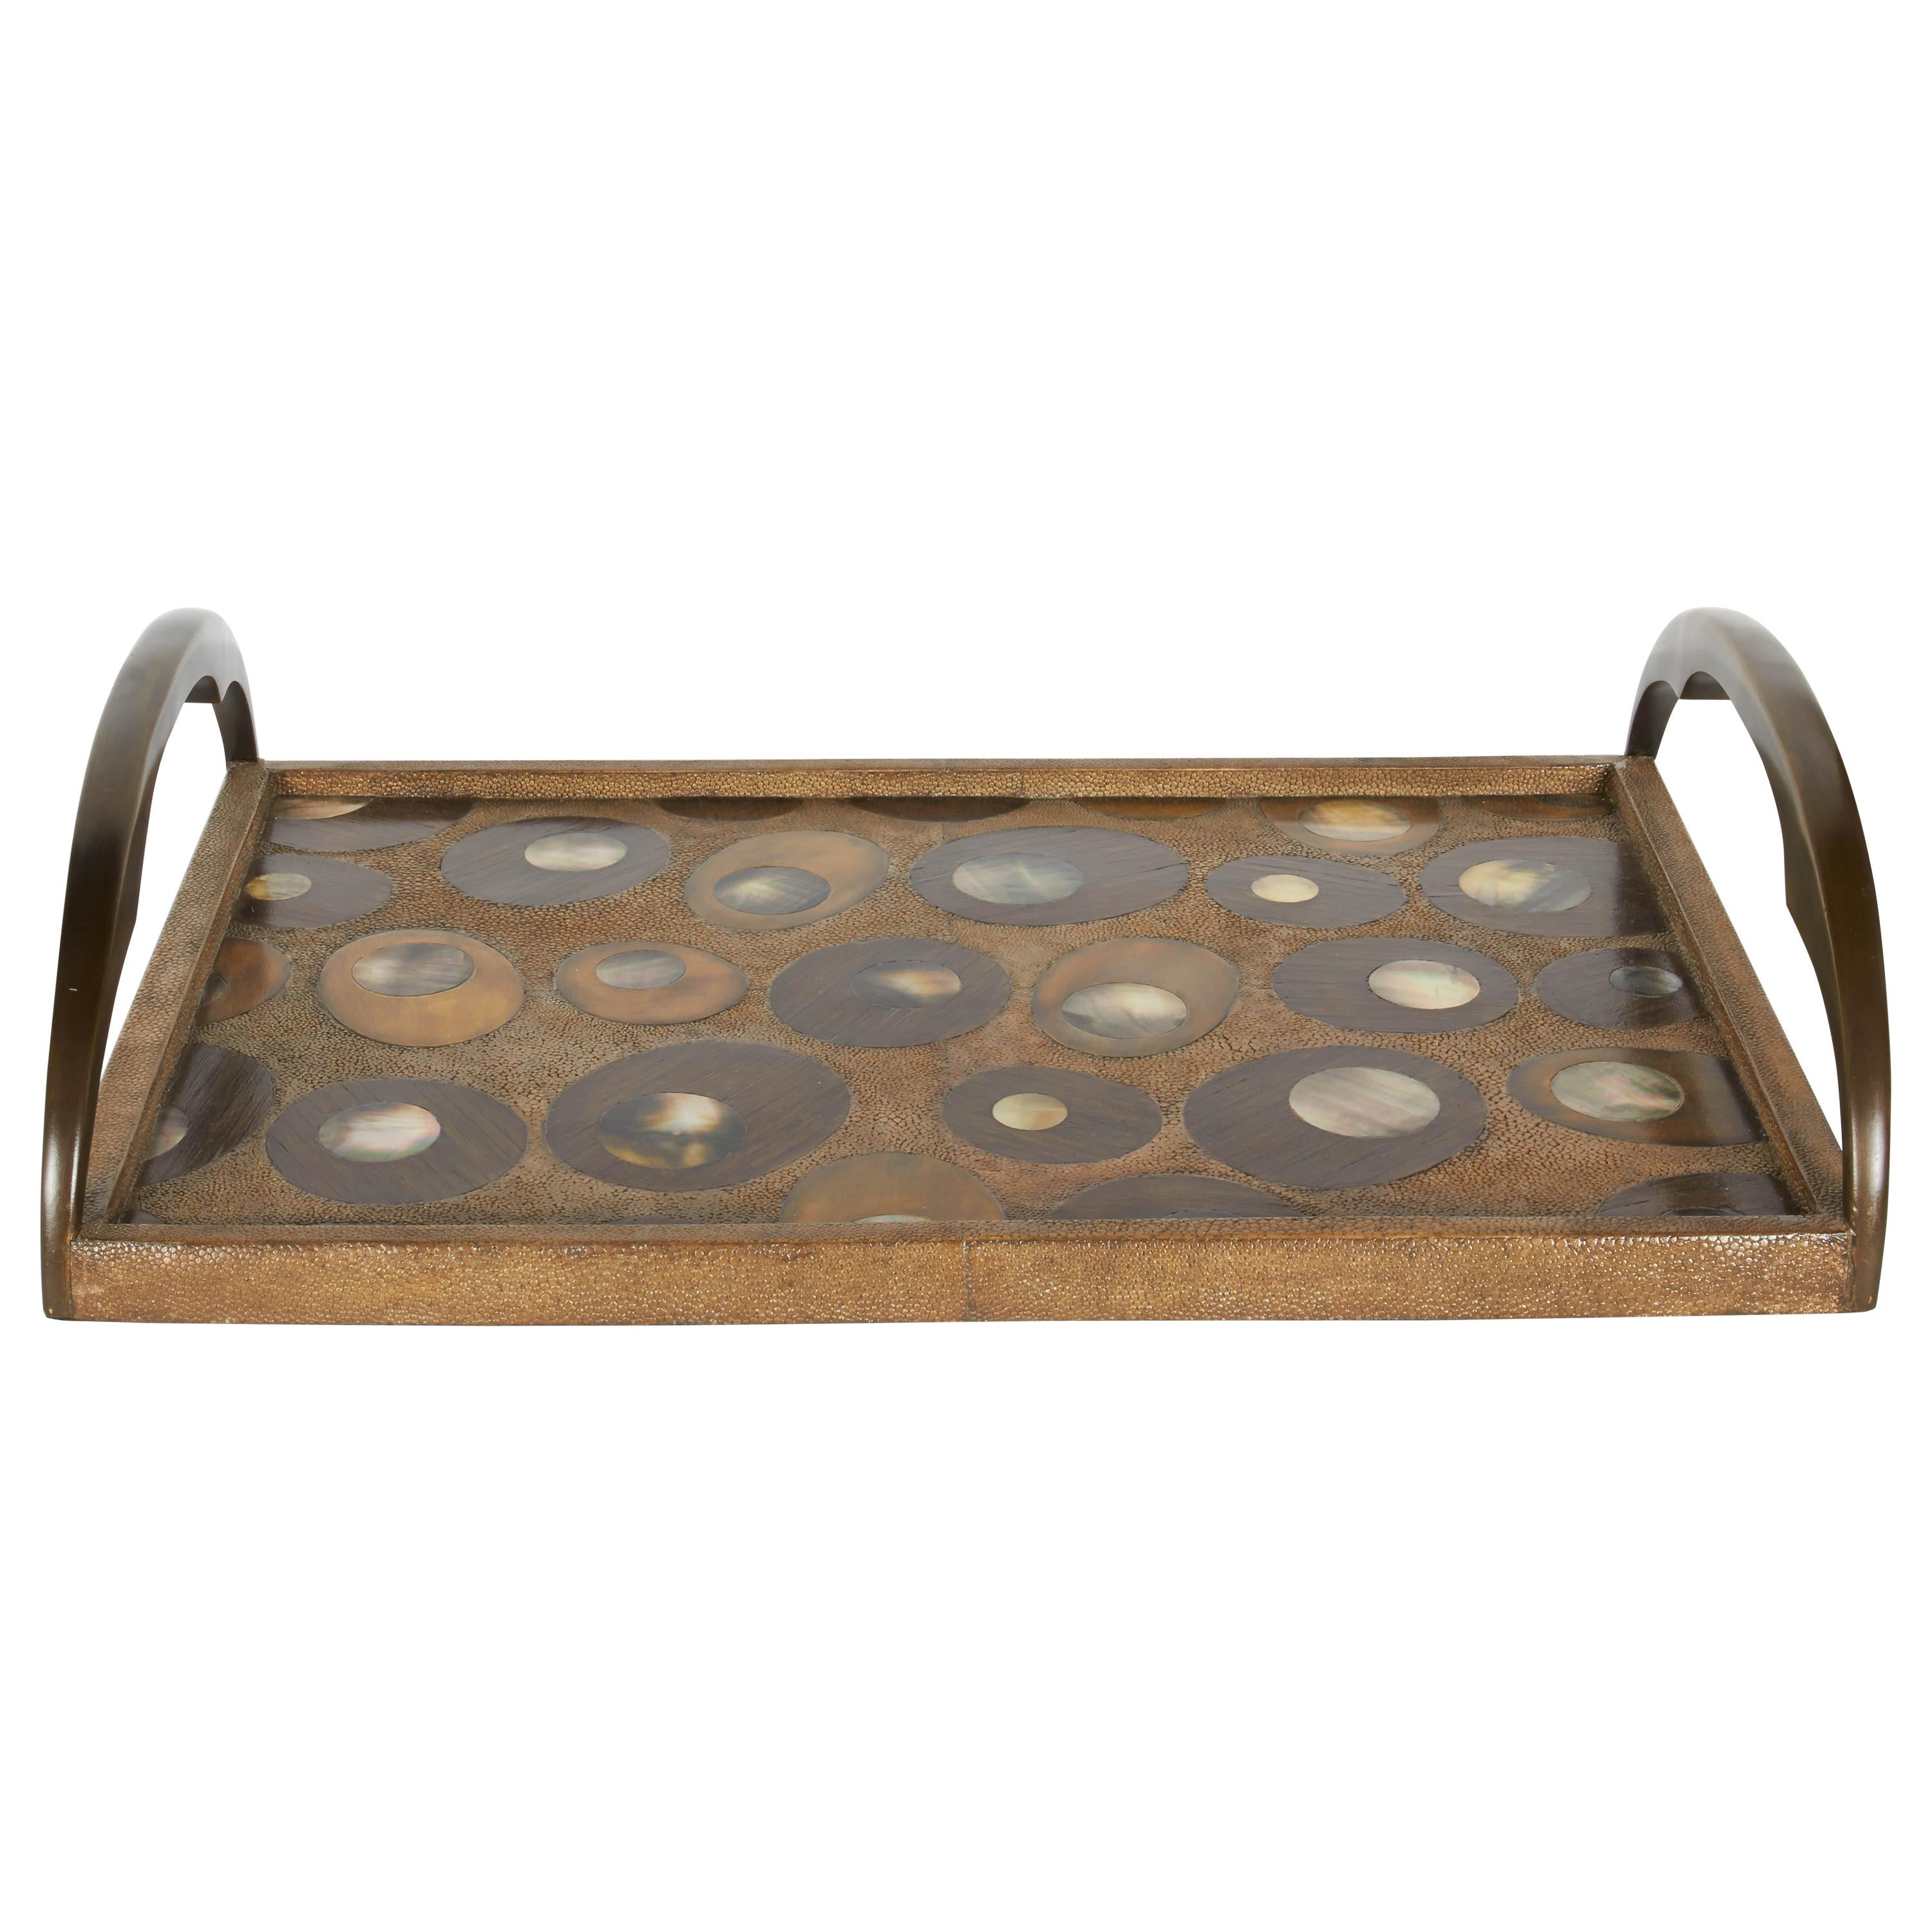 Organic Modern Shagreen Tray with Mother of Pearl Inlays and Bronze Hardware